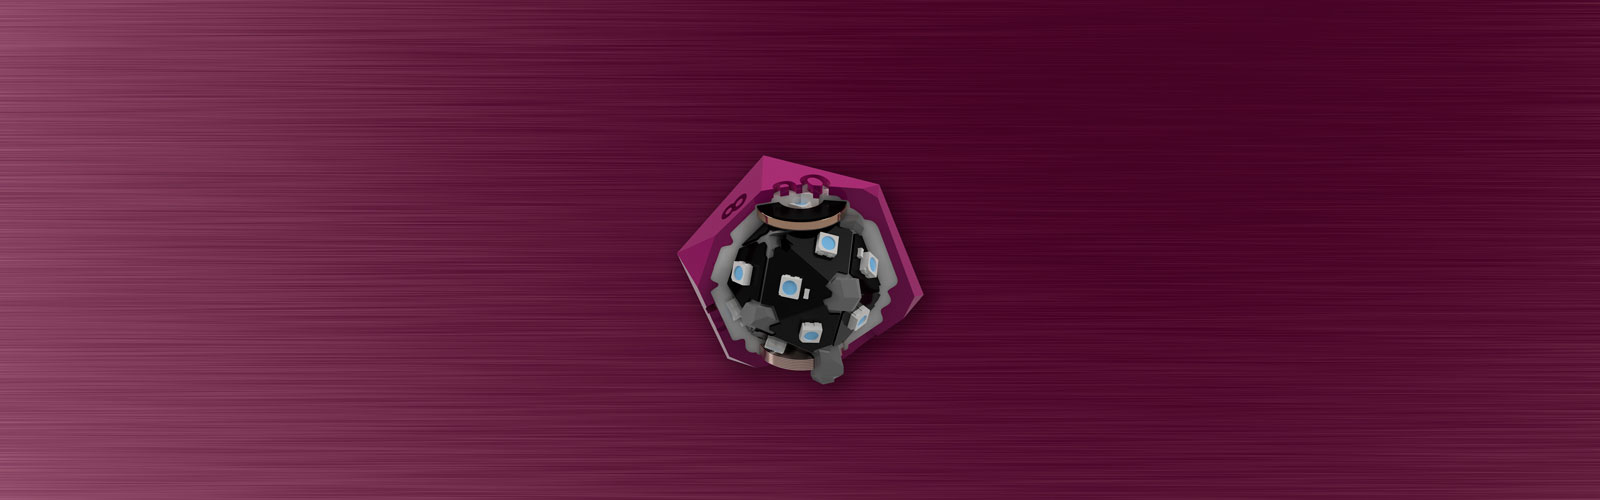 Cutaway view of a D20 showing outer layer, inner layer, and circuit board with caddy core.